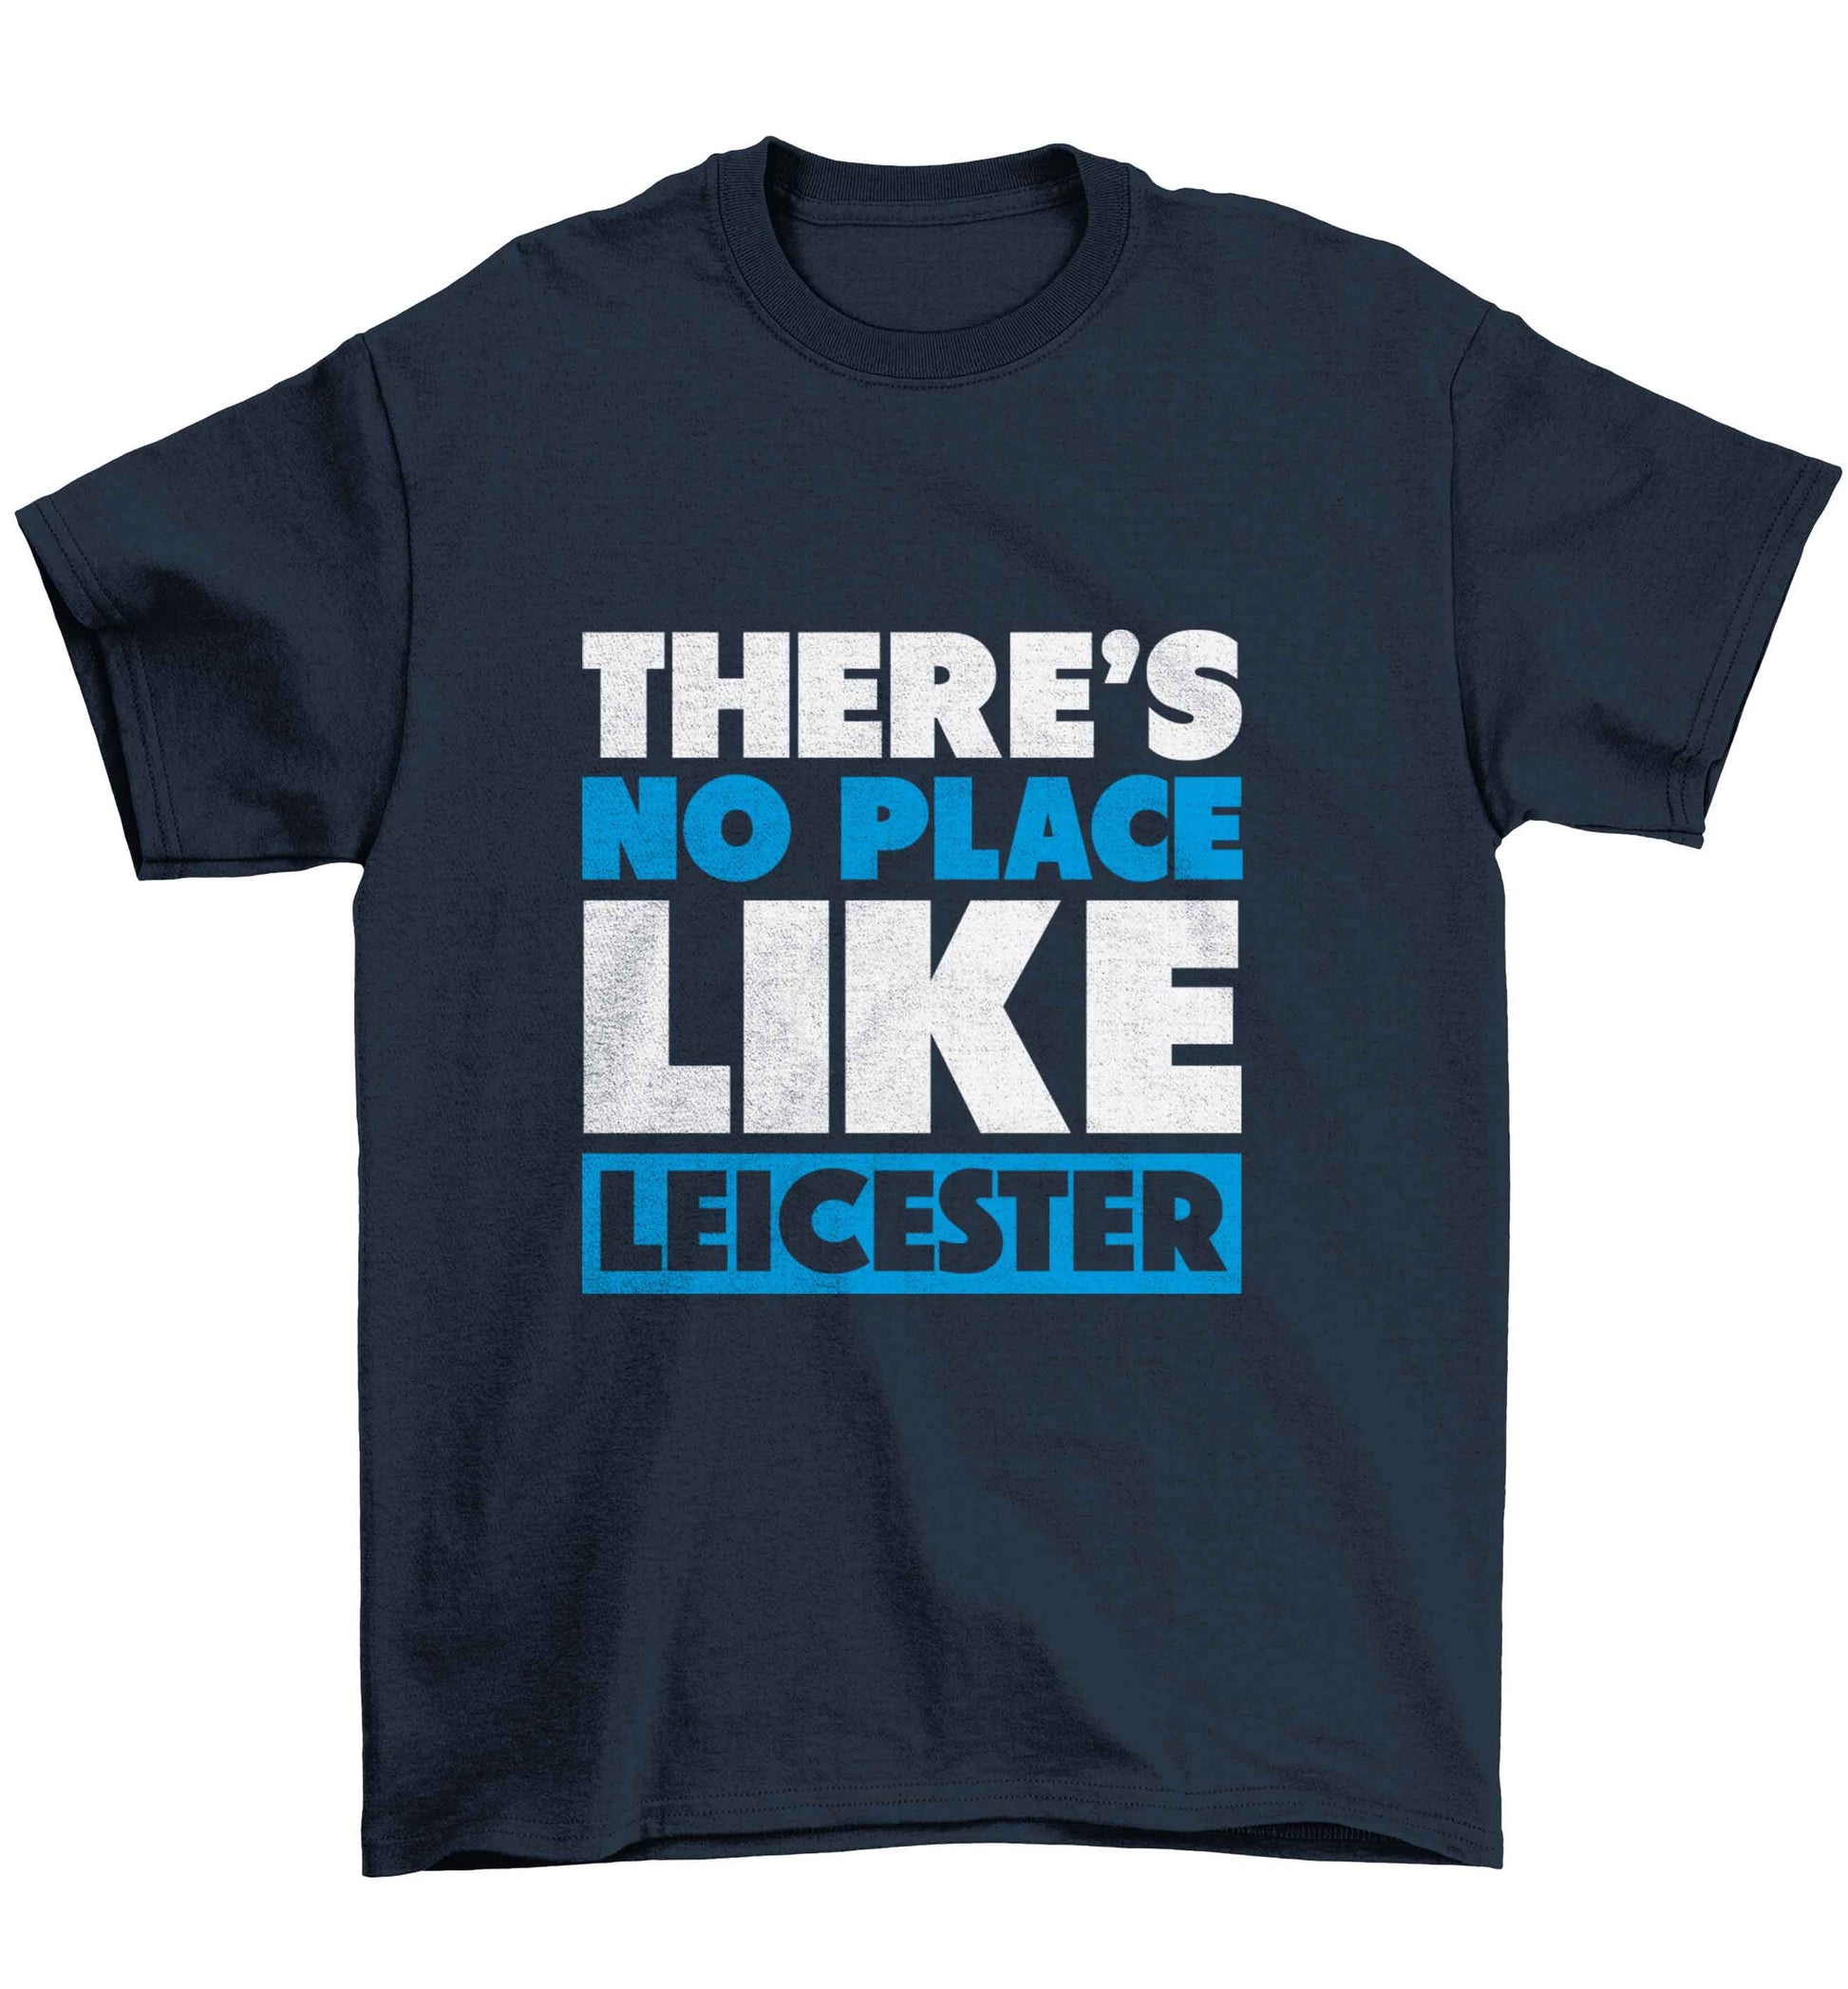 There's no place like Leicester Children's navy Tshirt 12-13 Years